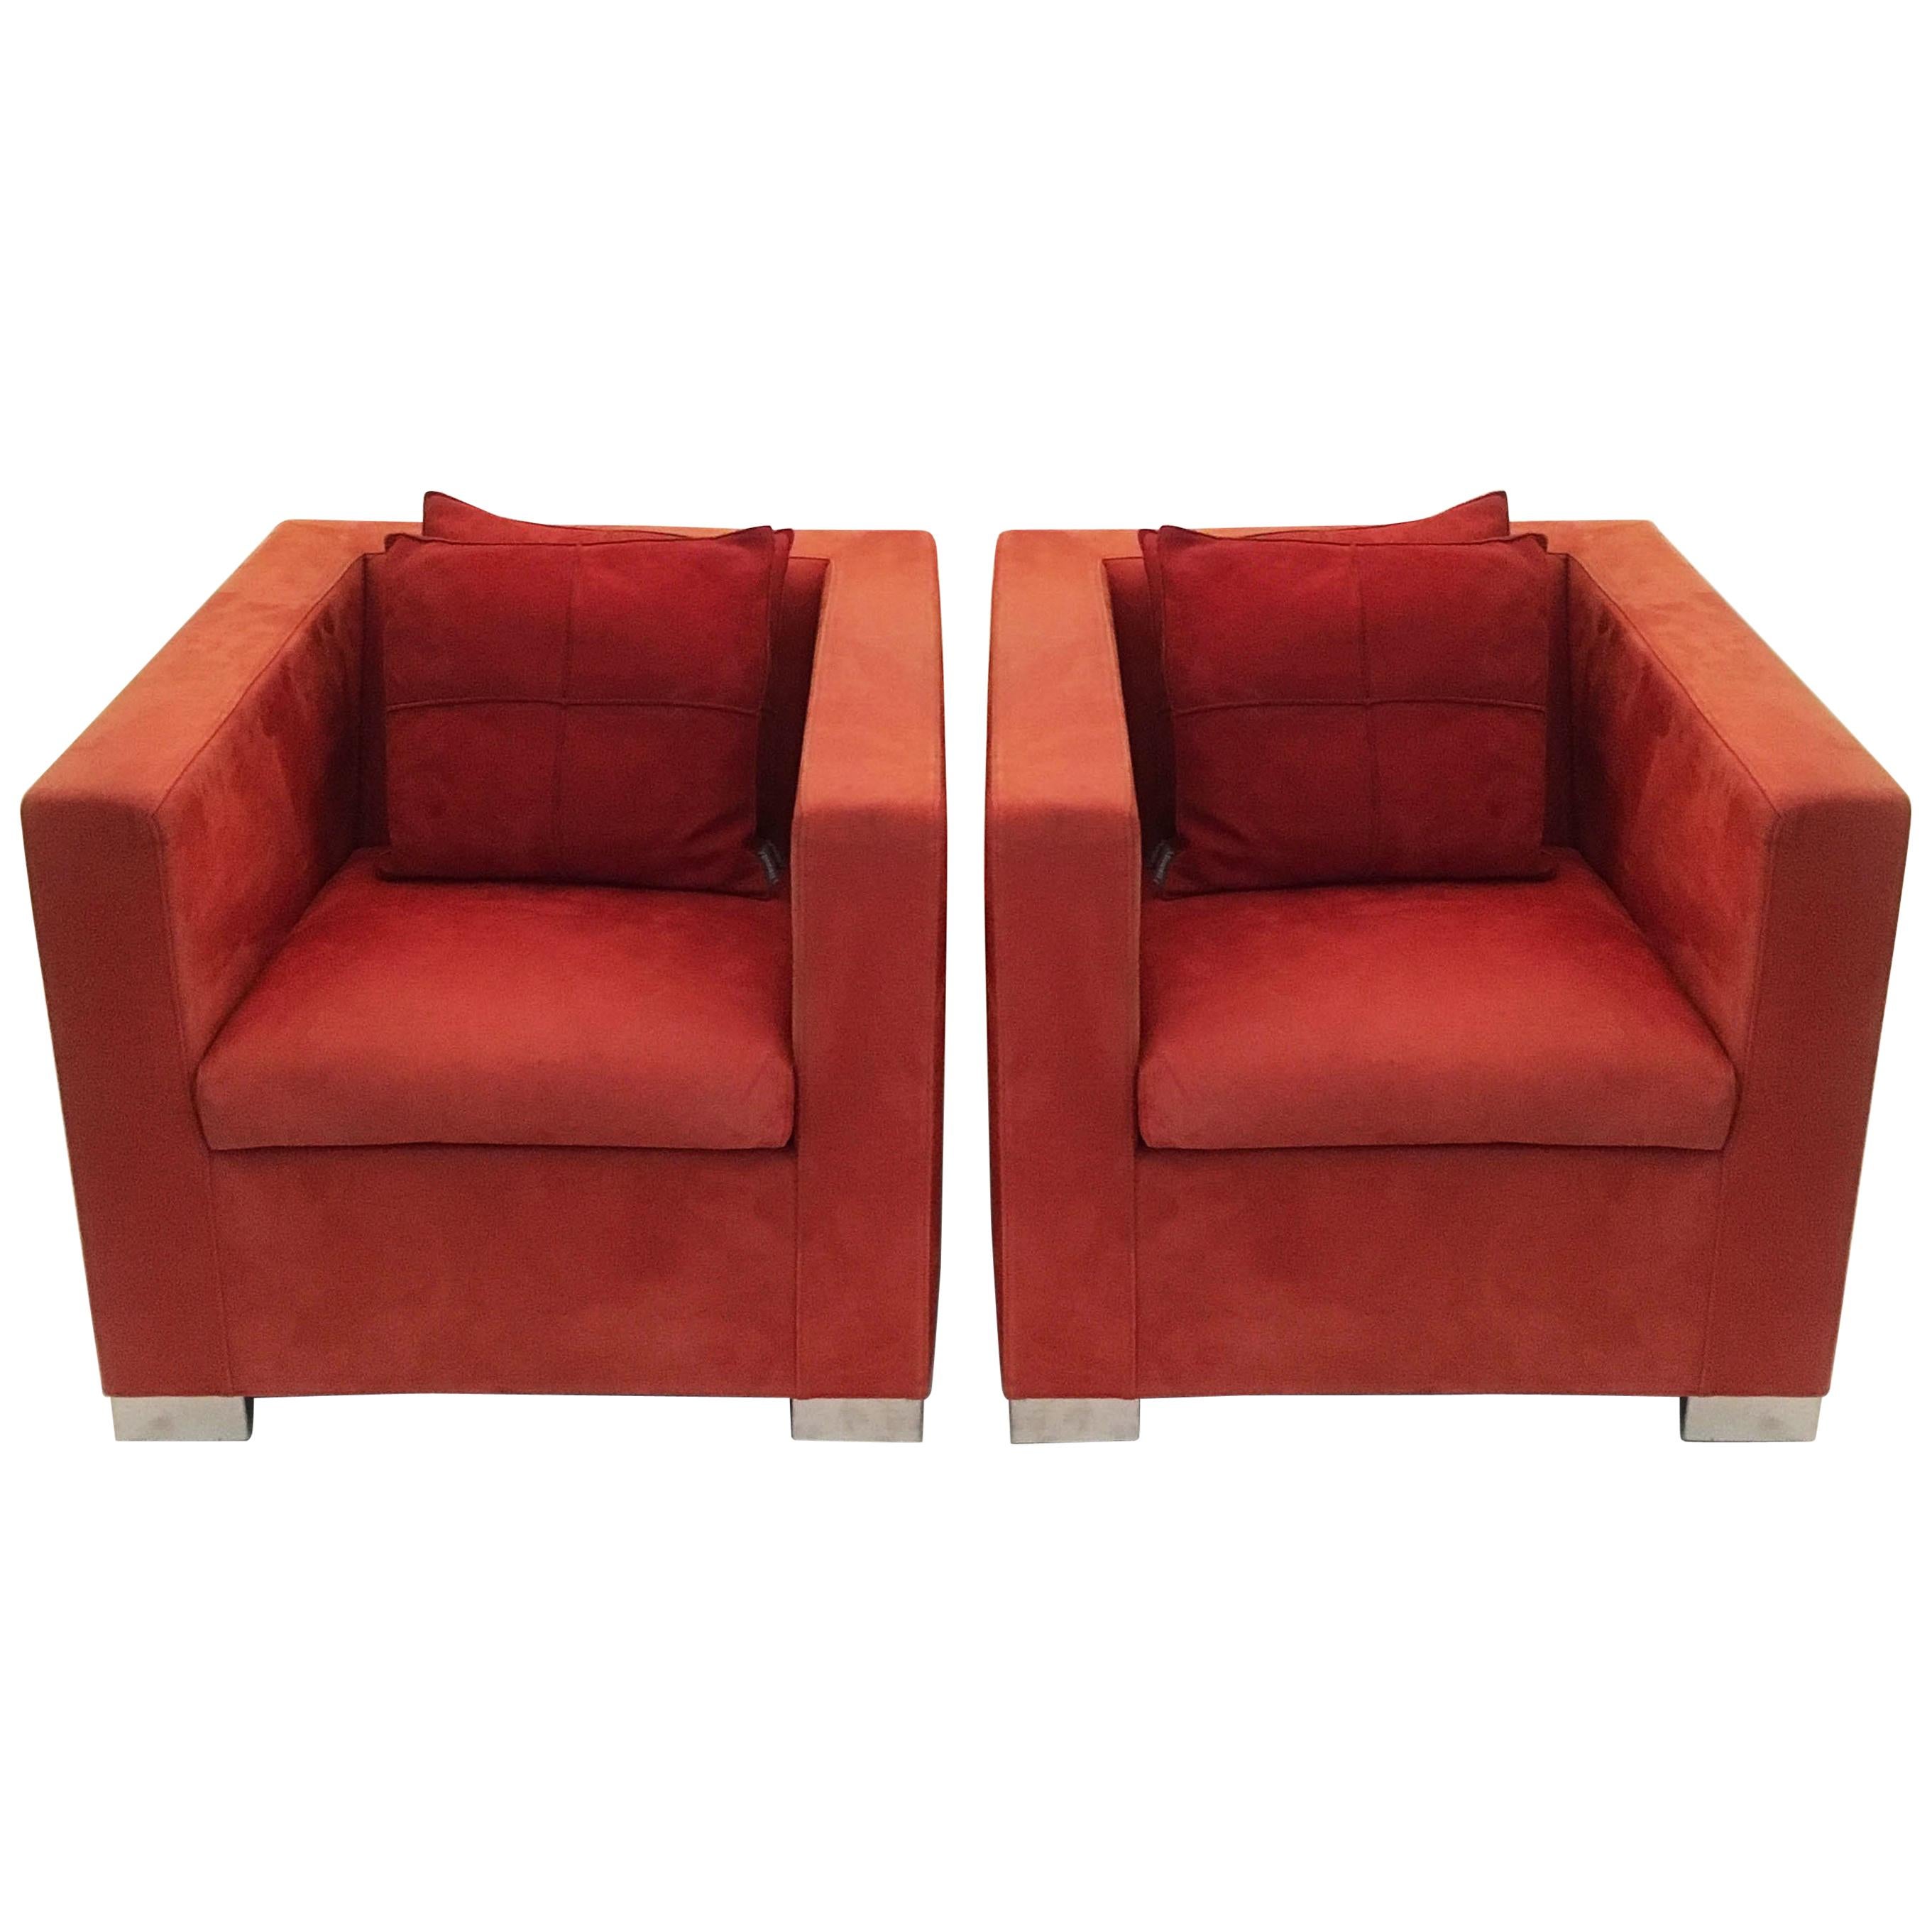 Minotti “Suitcase” Pair Club Chairs Armchairs, Rodolfo Dordoni, Italy, 1980s For Sale